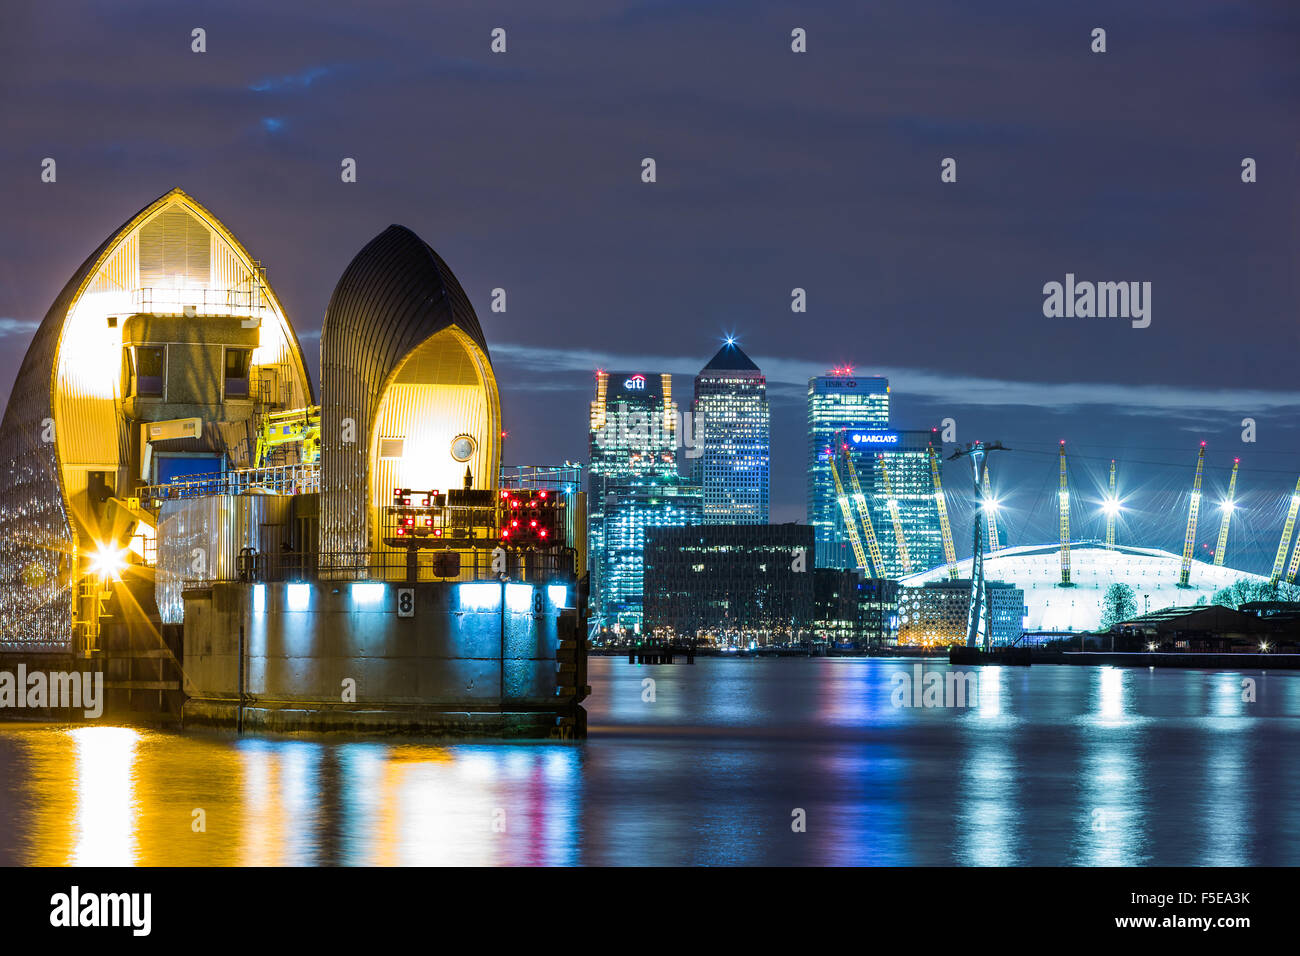 Thames Barrier, Millennium Dome (O2 Arena) and Canary Wharf at night, London, England, United Kingdom, Europe Stock Photo